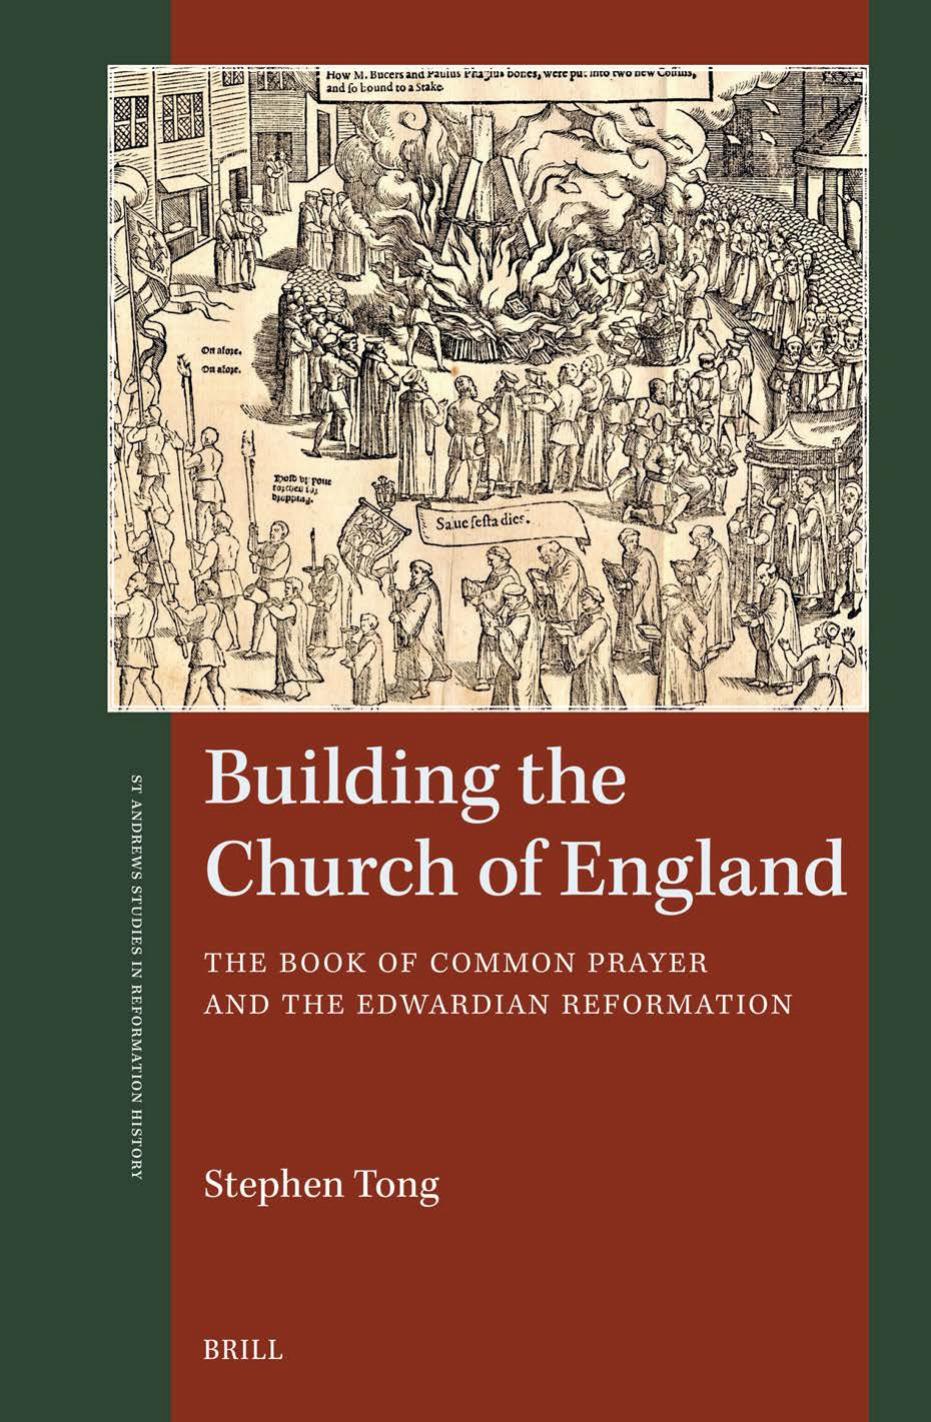 Building the Church of England: The Book of Common Prayer and the Edwardian Reformation by Stephen Tong